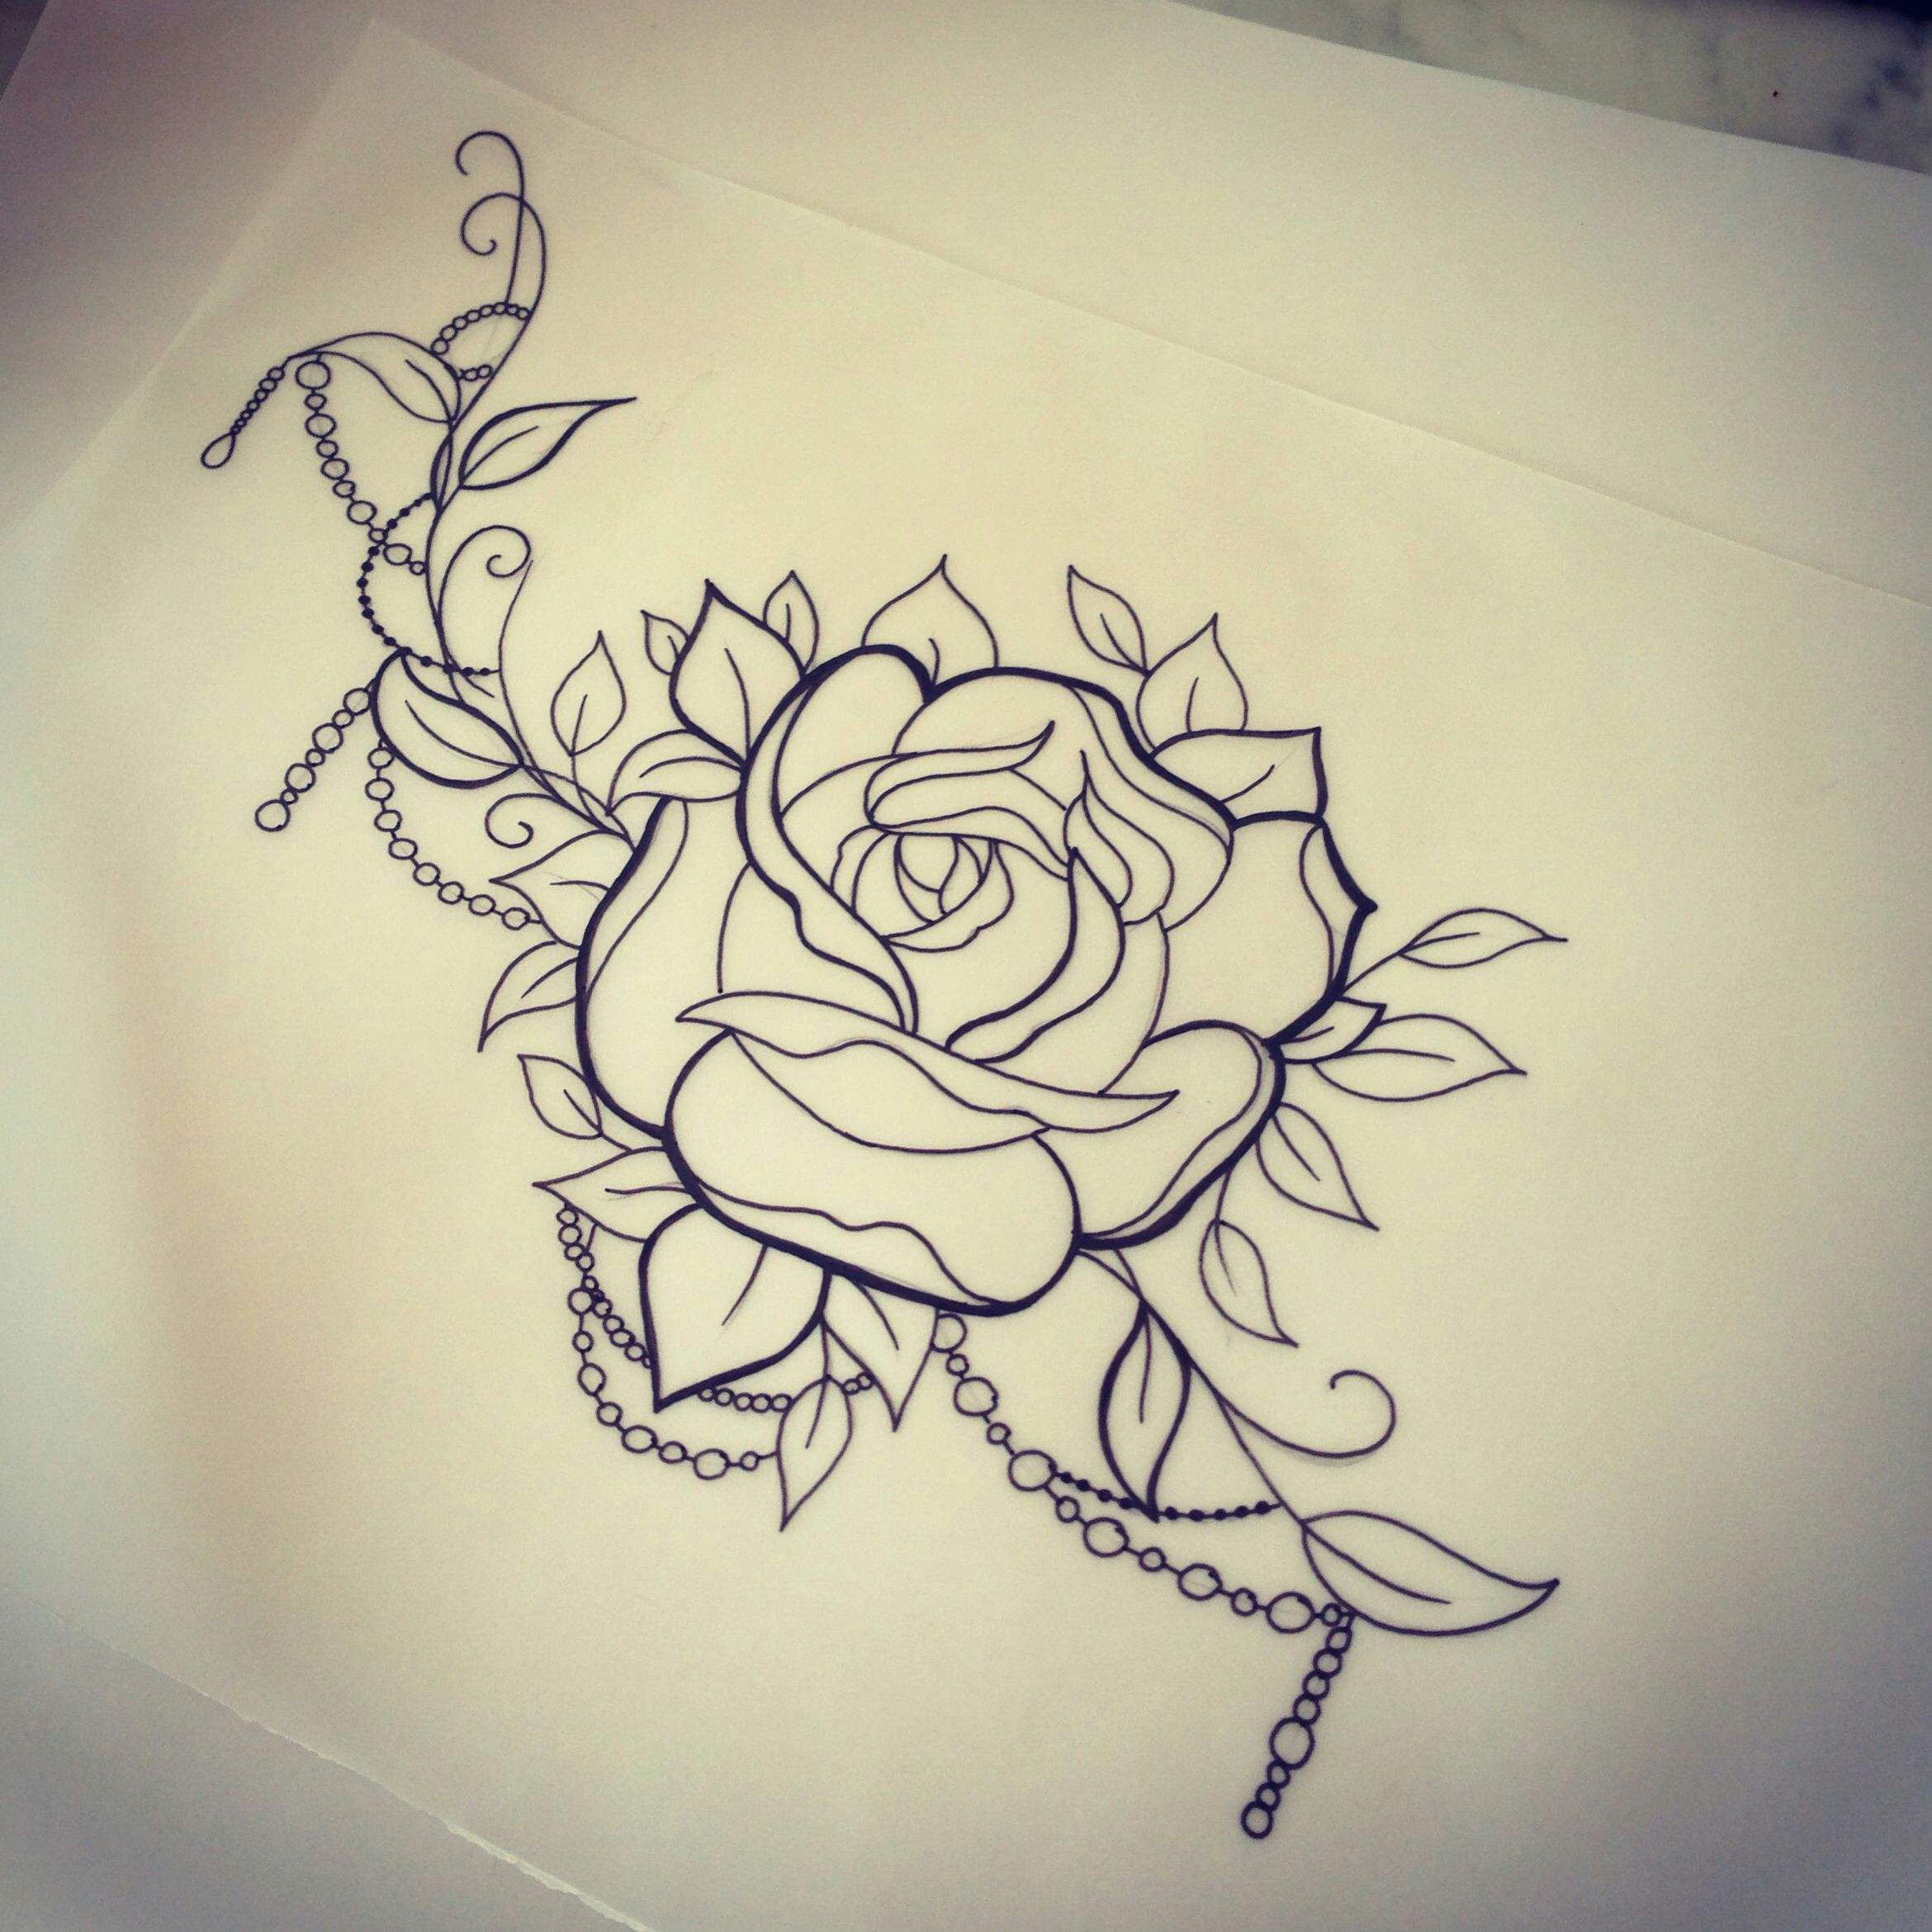 rose and beads tattoo drawings art drawings pictures to draw rose tattoos